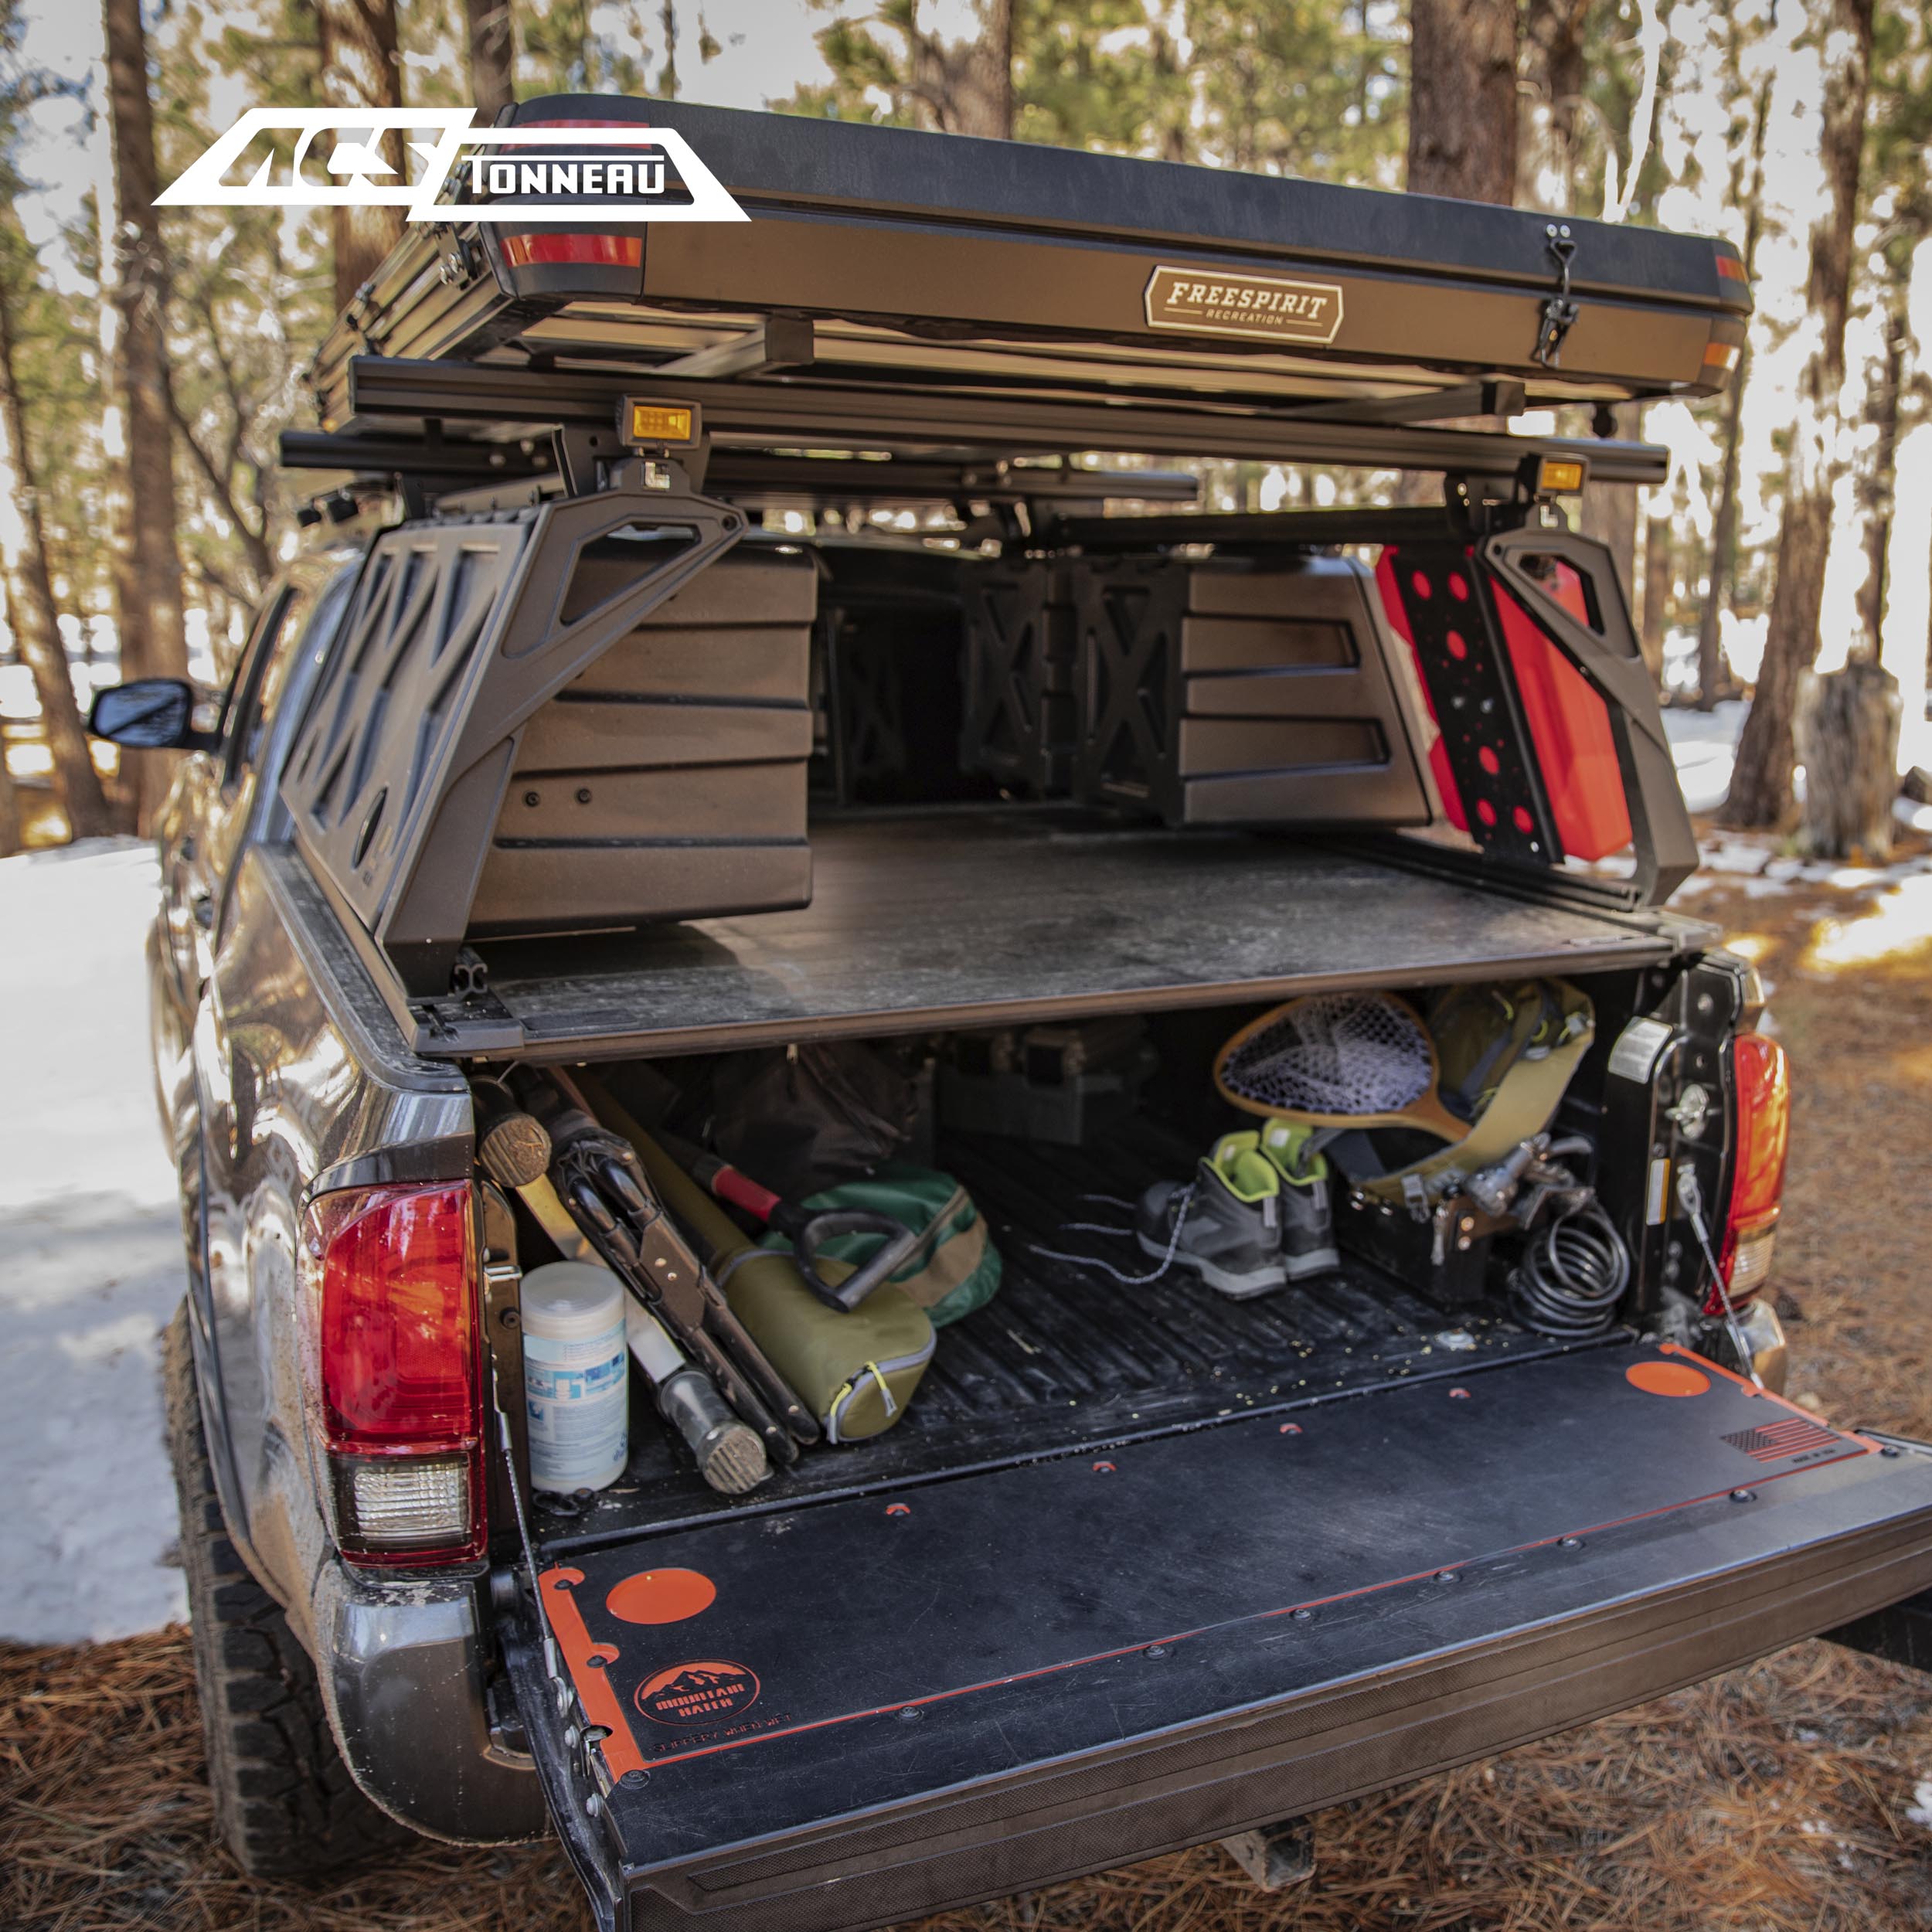 Leitner Designs ACS Forged Tonneau | 19-22 Ford Ranger 5'0" Bed Bed Rack - Leitner Canada